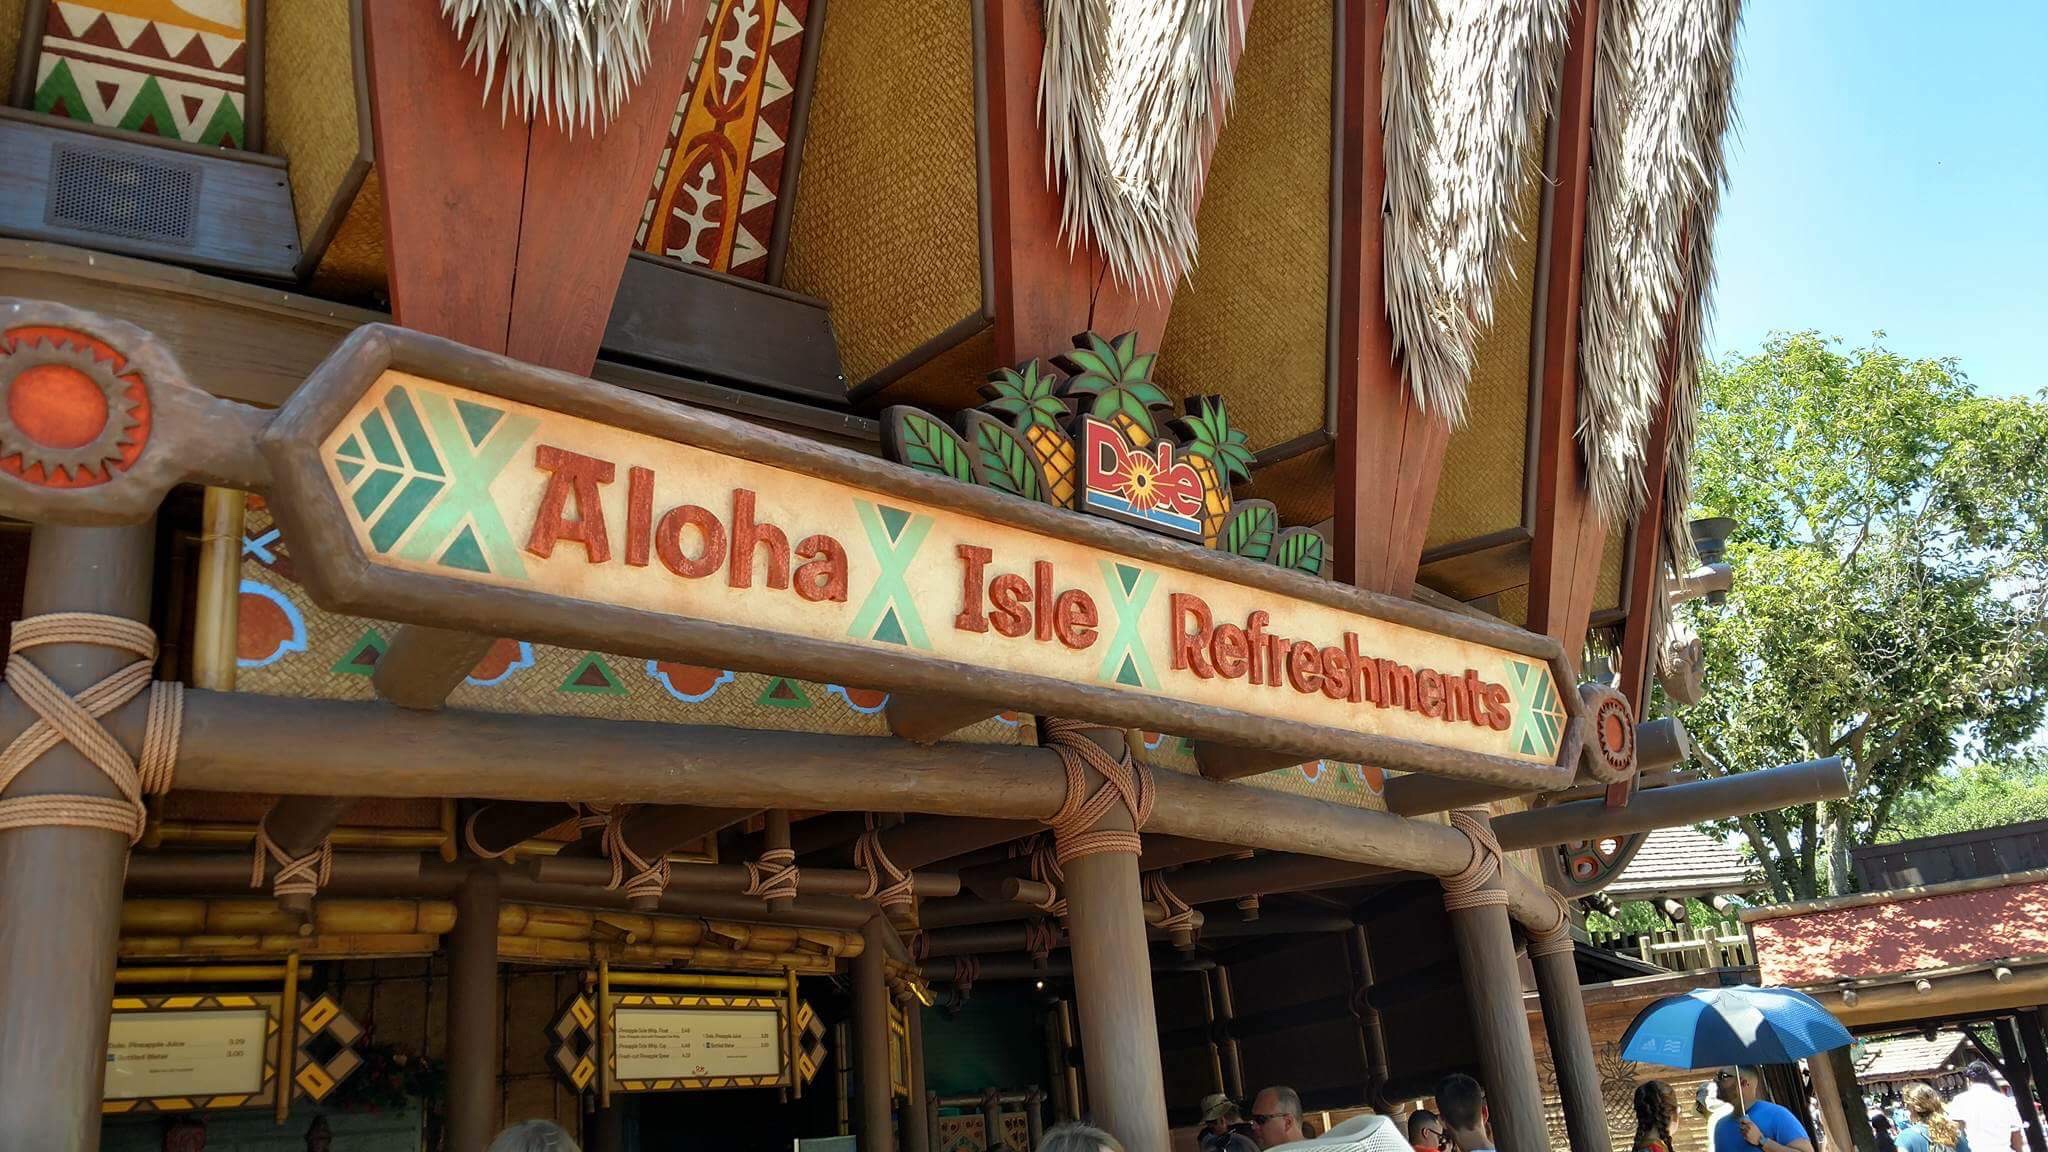 Enjoy Your Dole Whip Float in this Souvenir Mug from Aloha Isle